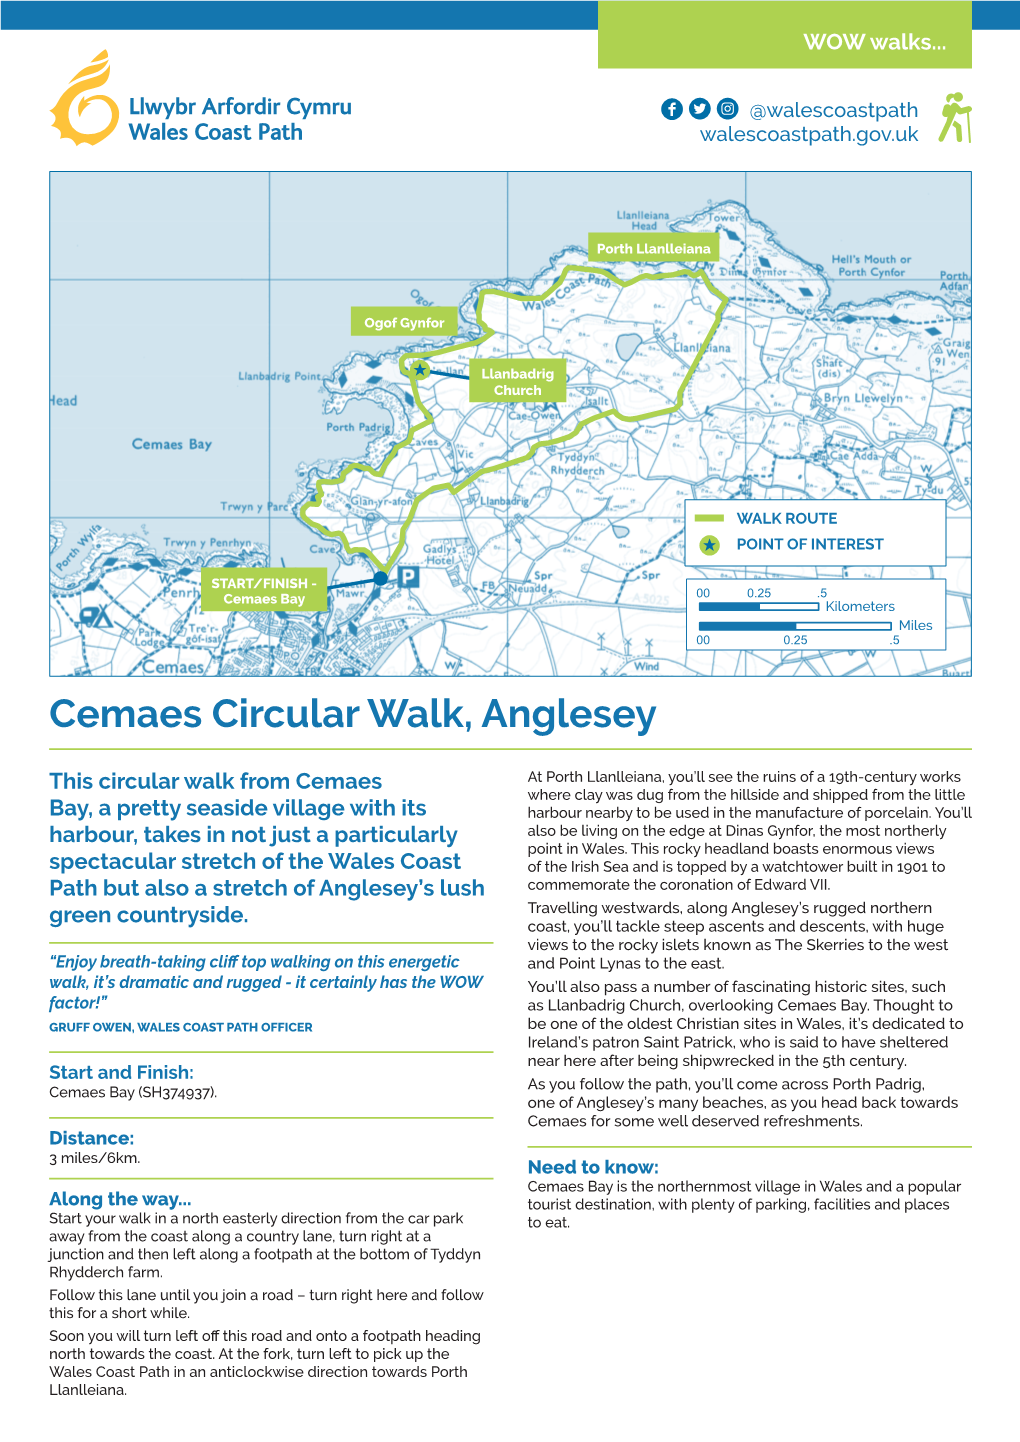 Cemaes Circular Walk, Anglesey